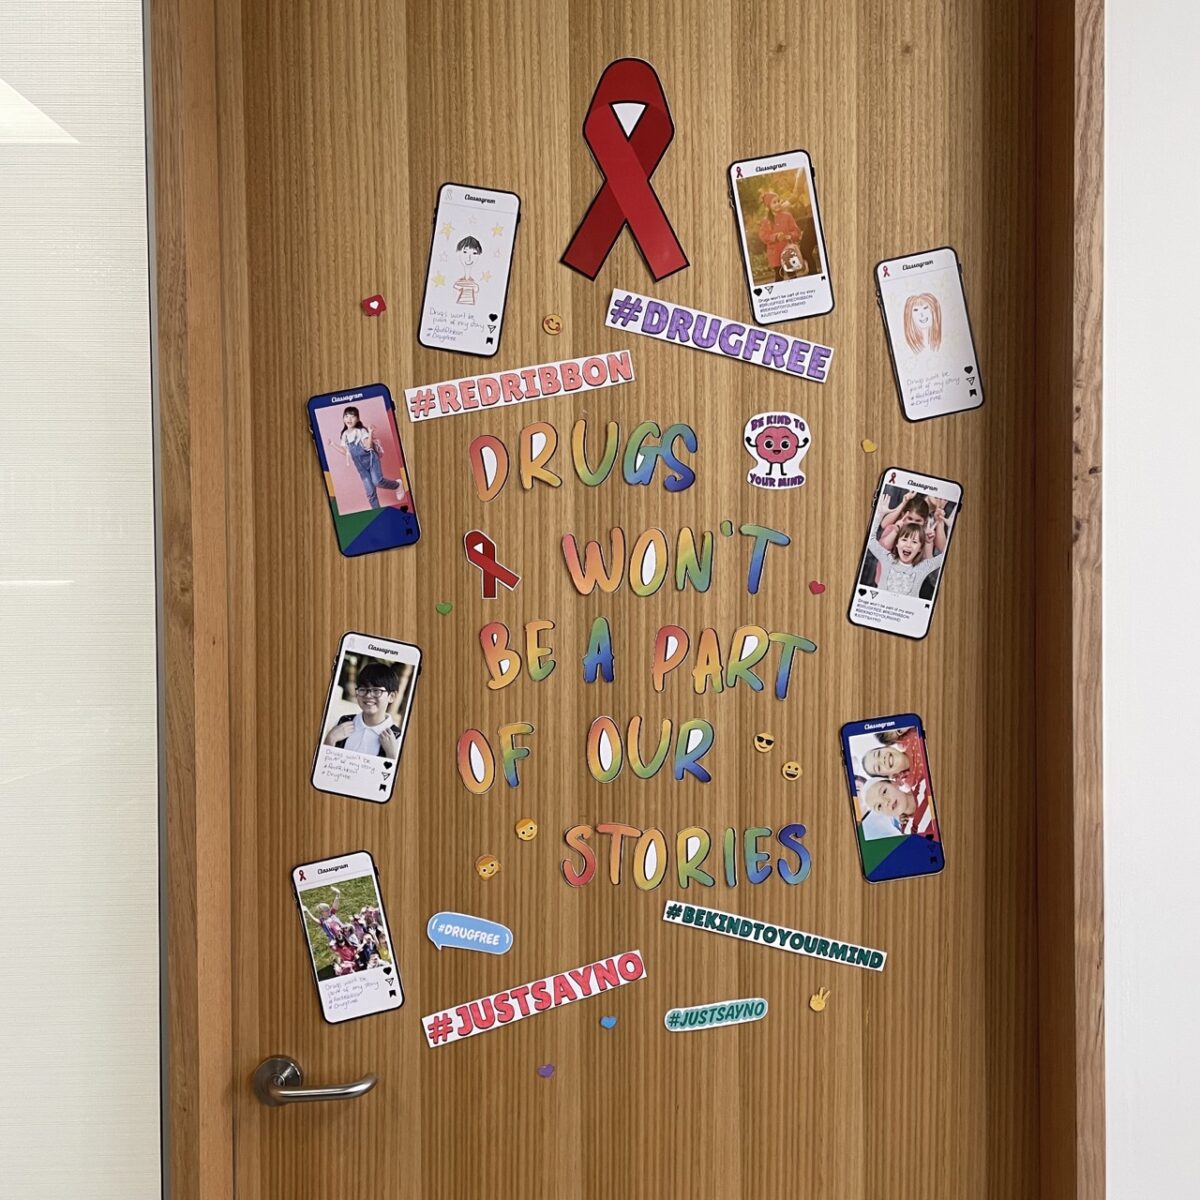 Drugs Won't Be a Part of My Story Red Ribbon Week door decor close up